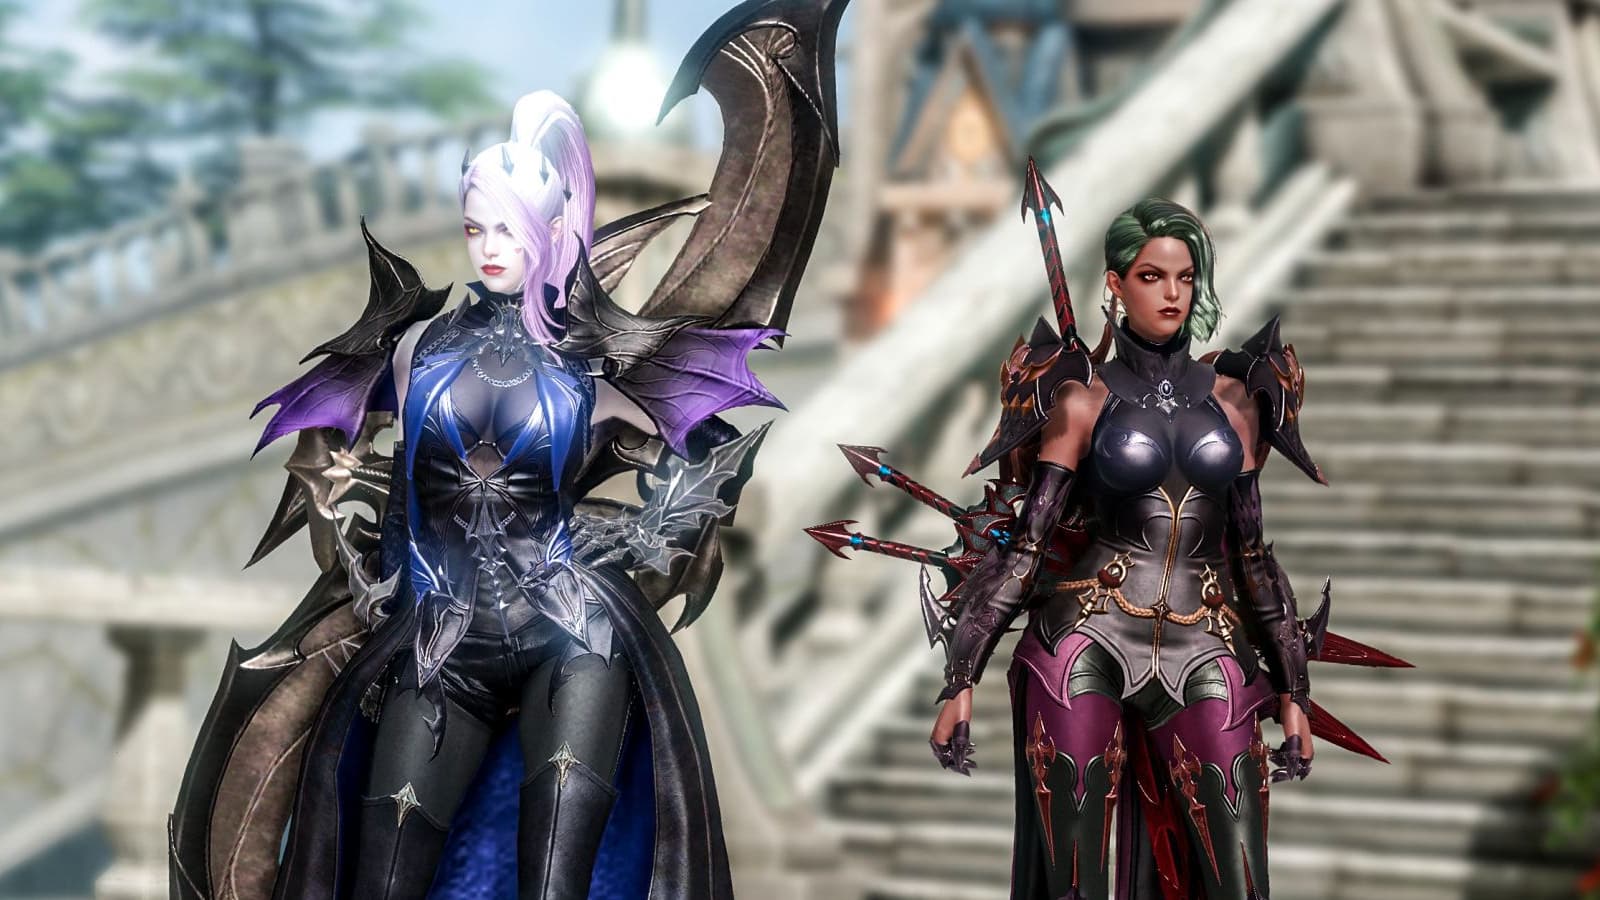 lost ark shadowhunter and deathblade classes stand together